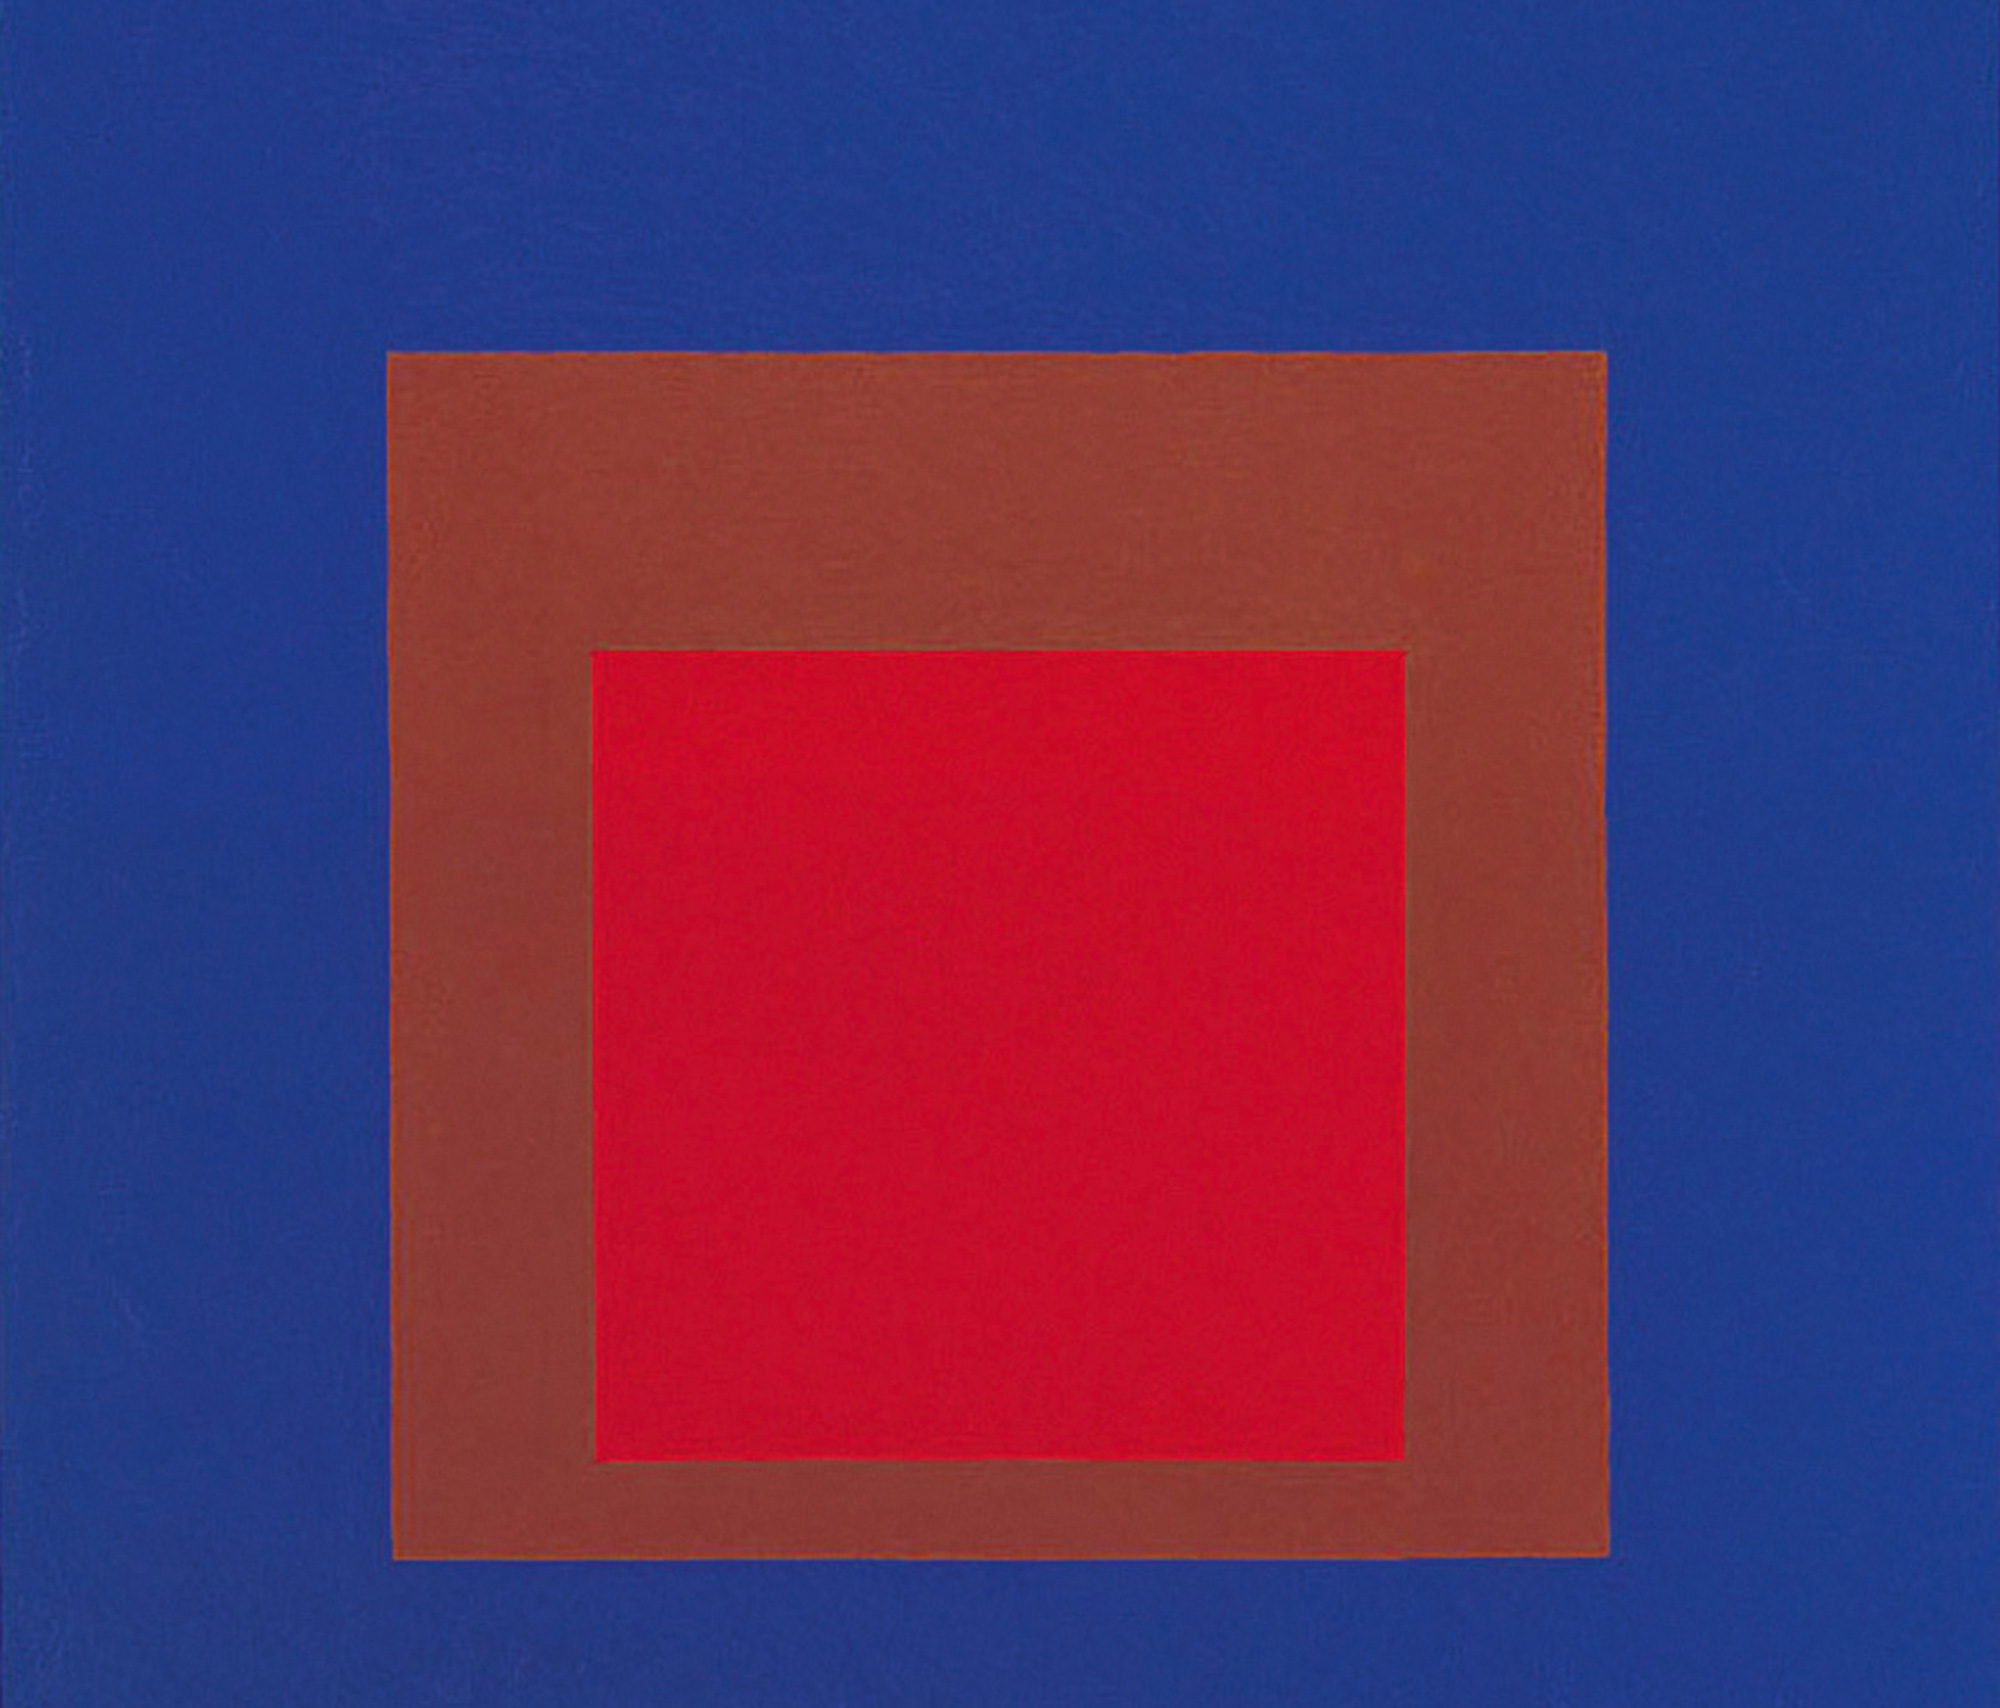 Josef Albers, Homage to the Square: On an Early Sky (detail), 1964.